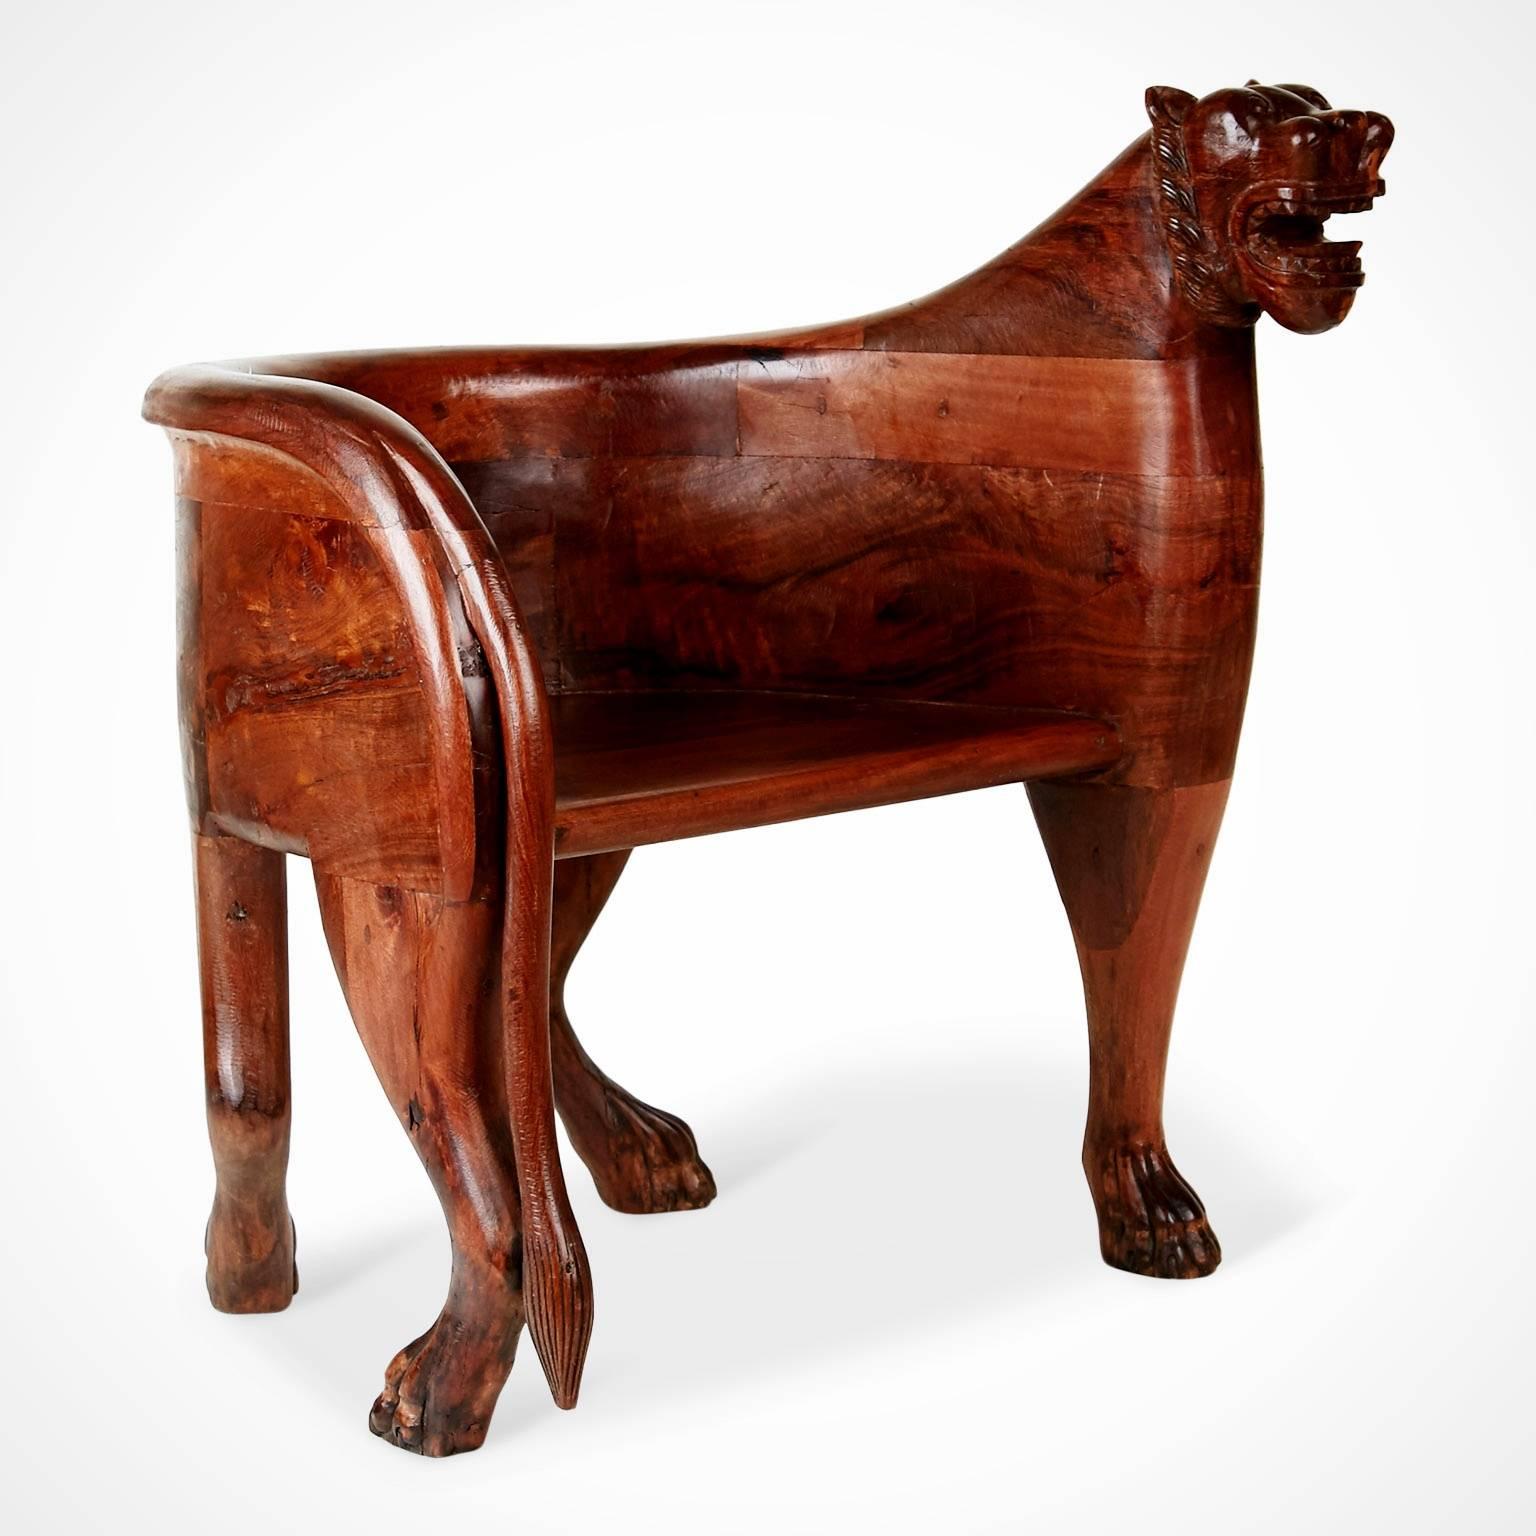 Figural Full Body Carved Teak Wood Lioness Club Chairs, Pair 4